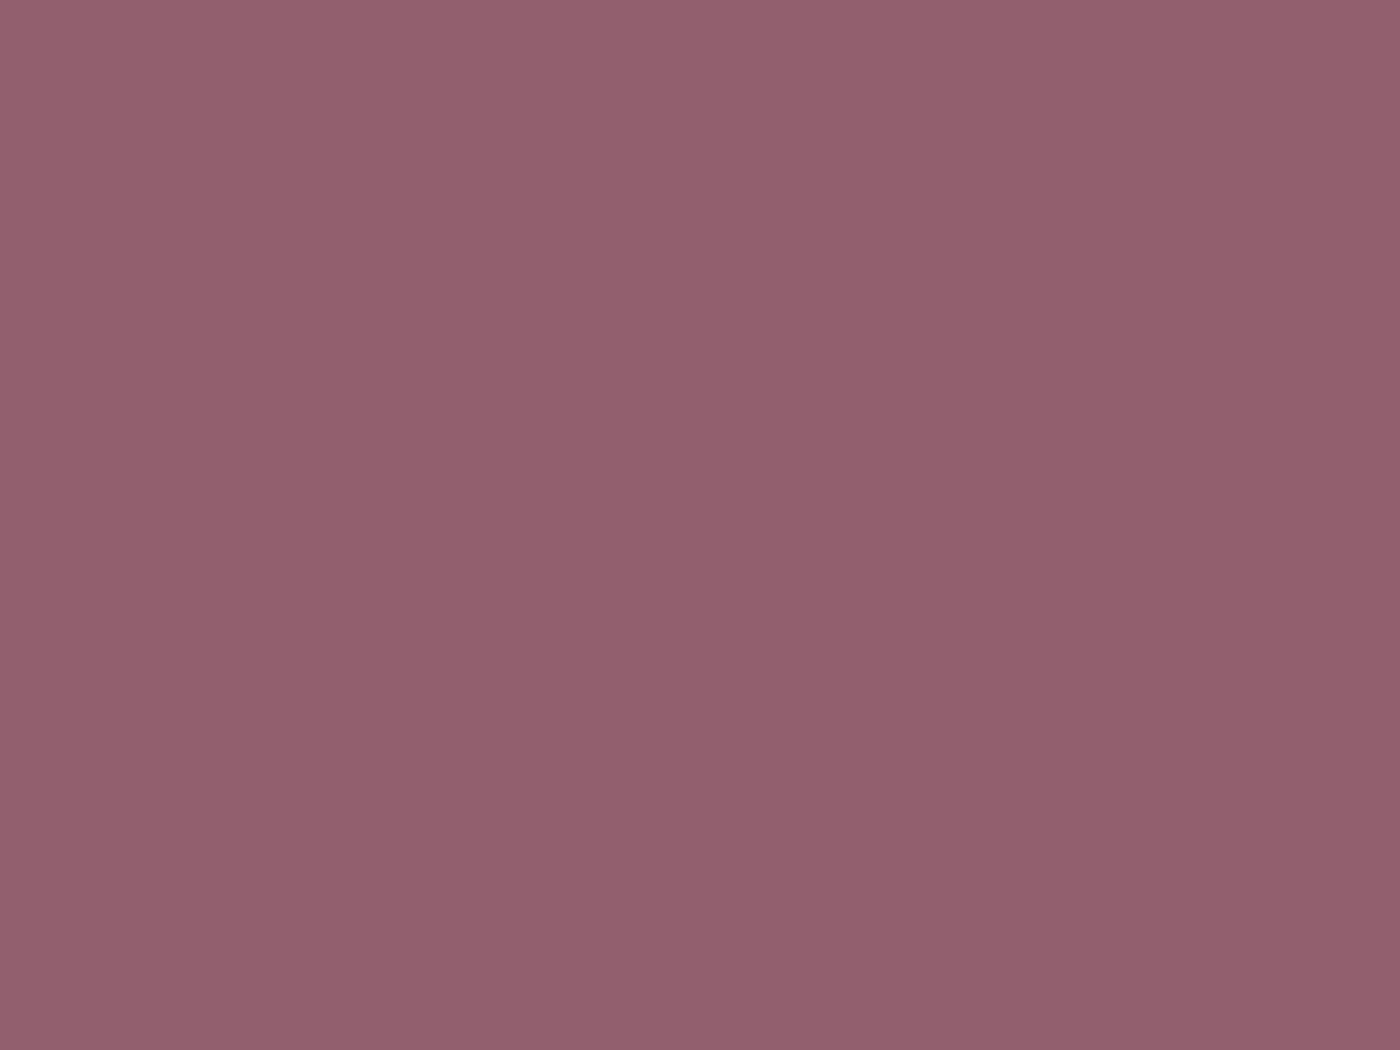 1400x1050 Raspberry Glace Solid Color Background